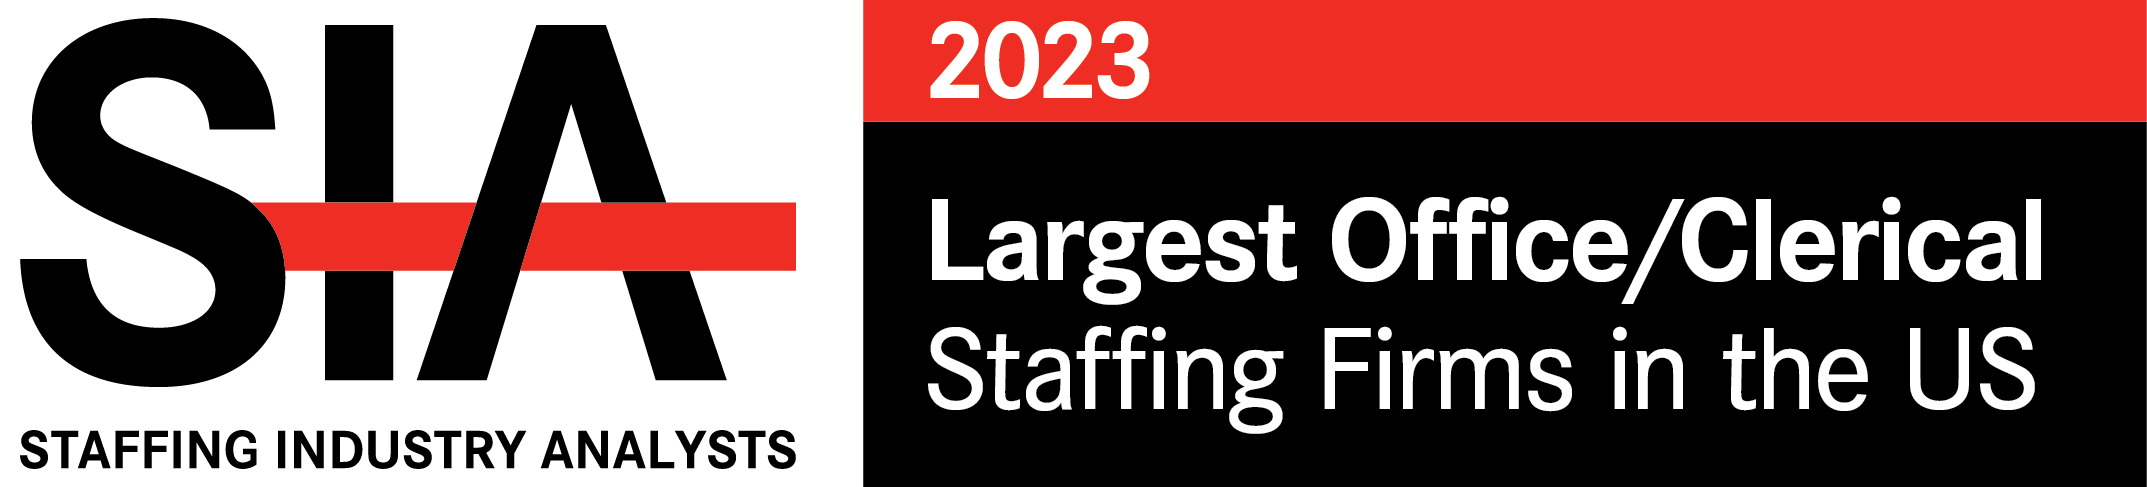 Staffing Industry Analysts Largest Office/Clerical Staffing Firms in U.S. Logo